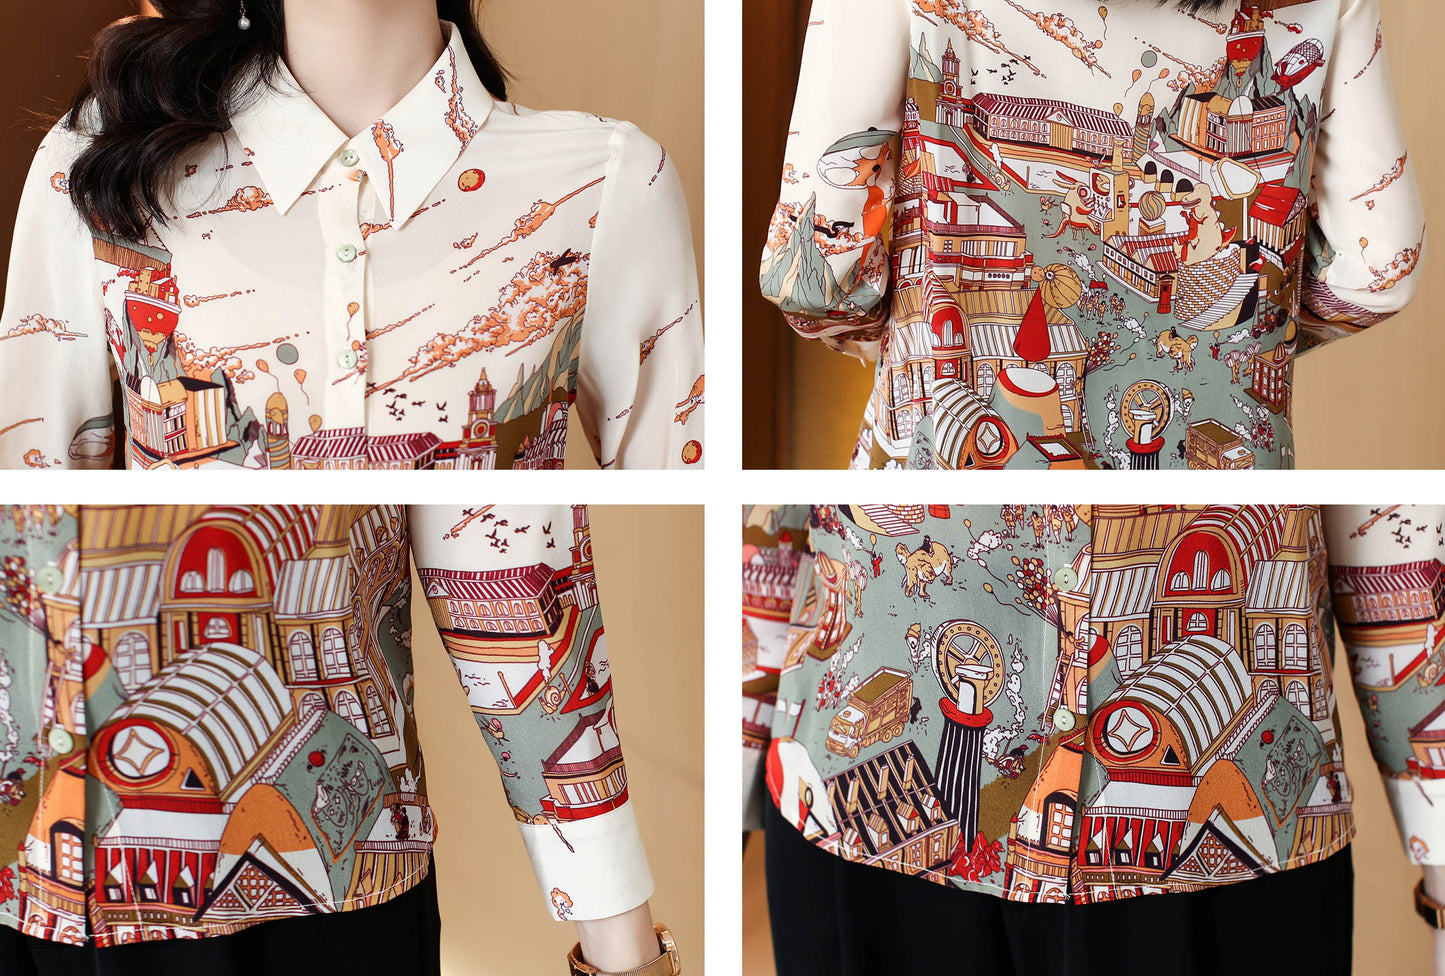 Print Collared Long Sleeve Shirt Button up Blouse